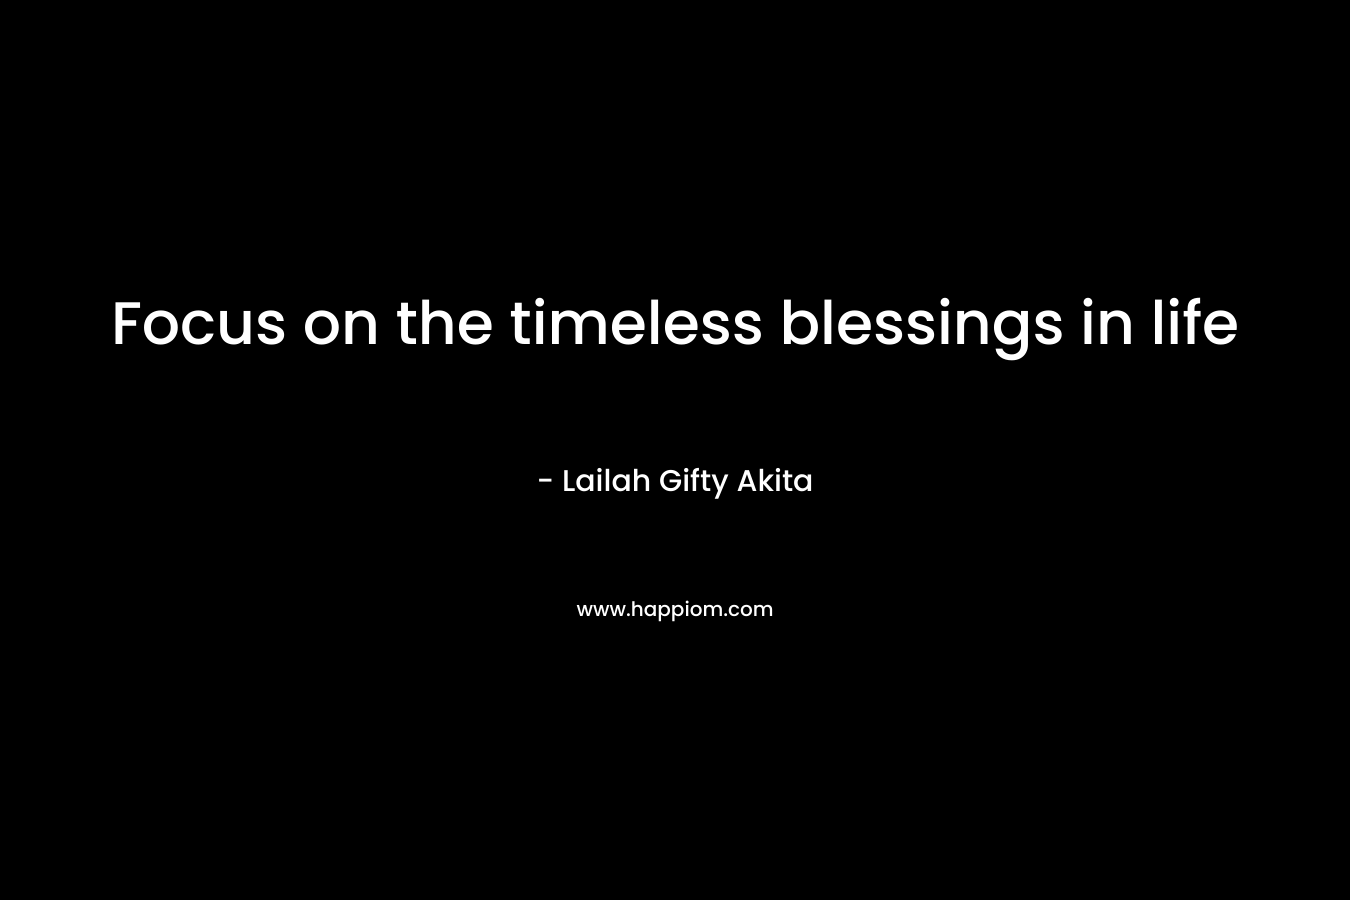 Focus on the timeless blessings in life